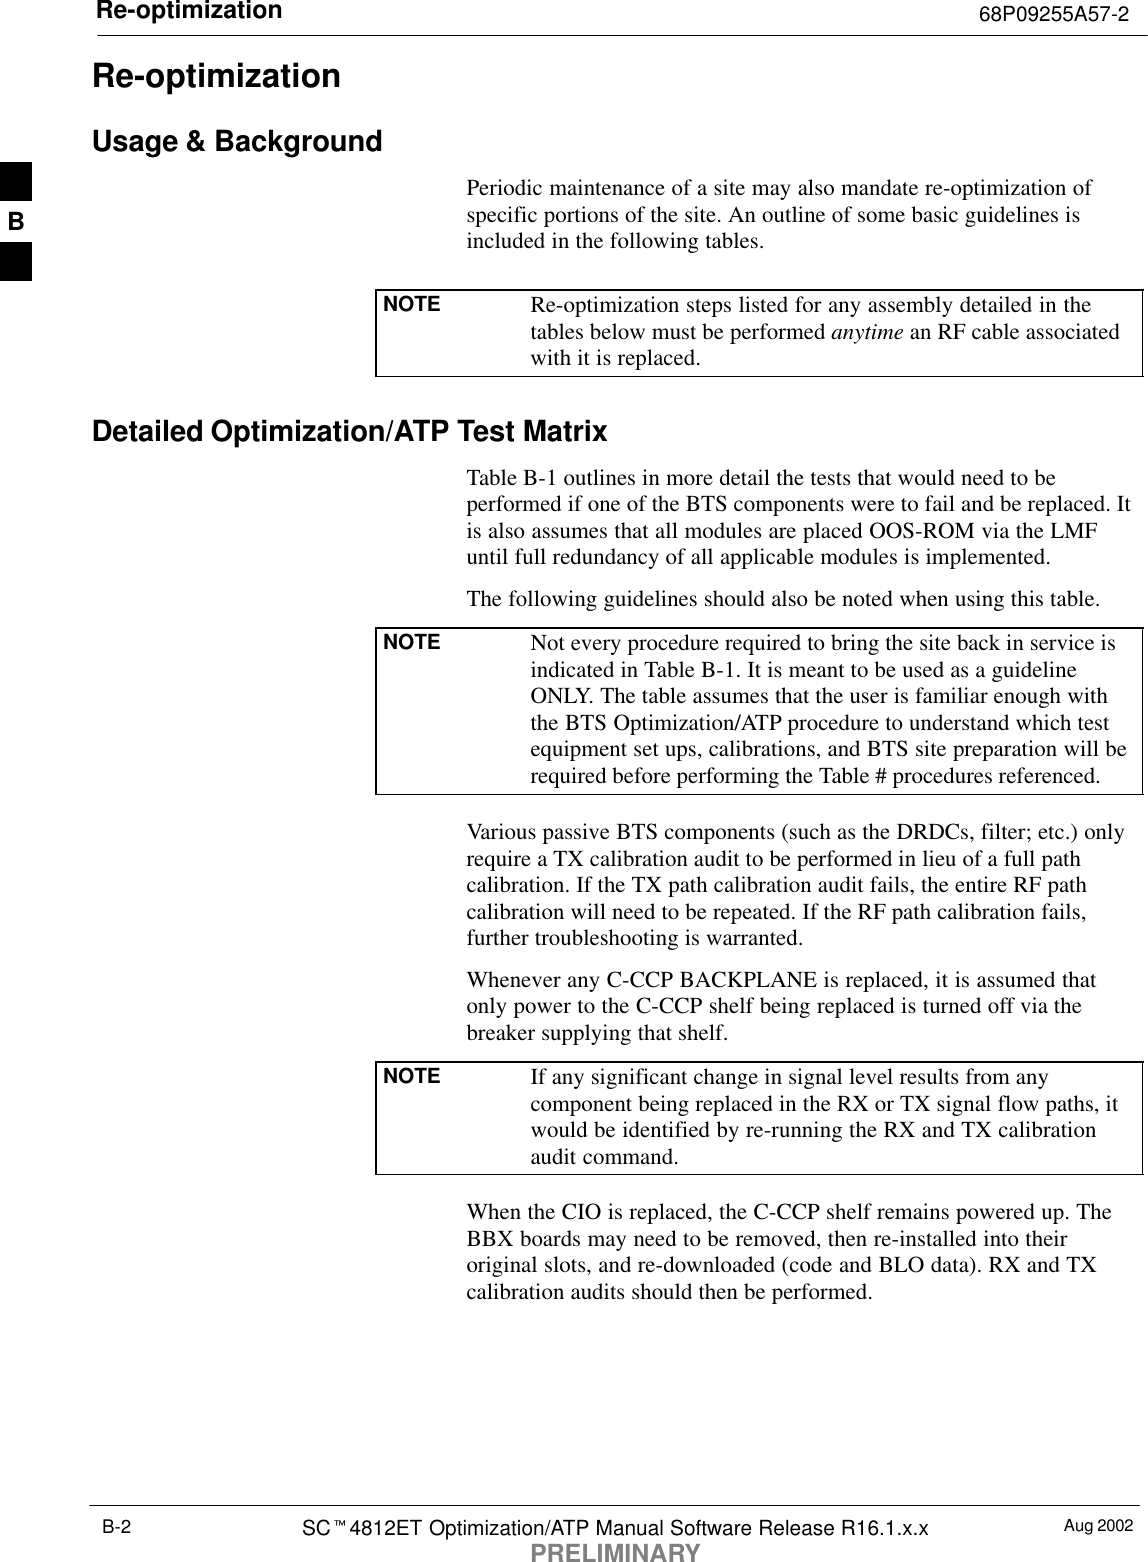 Re-optimization 68P09255A57-2Aug 2002SCt4812ET Optimization/ATP Manual Software Release R16.1.x.xPRELIMINARYB-2Re-optimizationUsage &amp; BackgroundPeriodic maintenance of a site may also mandate re-optimization ofspecific portions of the site. An outline of some basic guidelines isincluded in the following tables.NOTE Re-optimization steps listed for any assembly detailed in thetables below must be performed anytime an RF cable associatedwith it is replaced.Detailed Optimization/ATP Test MatrixTable B-1 outlines in more detail the tests that would need to beperformed if one of the BTS components were to fail and be replaced. Itis also assumes that all modules are placed OOS-ROM via the LMFuntil full redundancy of all applicable modules is implemented.The following guidelines should also be noted when using this table.NOTE Not every procedure required to bring the site back in service isindicated in Table B-1. It is meant to be used as a guidelineONLY. The table assumes that the user is familiar enough withthe BTS Optimization/ATP procedure to understand which testequipment set ups, calibrations, and BTS site preparation will berequired before performing the Table # procedures referenced.Various passive BTS components (such as the DRDCs, filter; etc.) onlyrequire a TX calibration audit to be performed in lieu of a full pathcalibration. If the TX path calibration audit fails, the entire RF pathcalibration will need to be repeated. If the RF path calibration fails,further troubleshooting is warranted.Whenever any C-CCP BACKPLANE is replaced, it is assumed thatonly power to the C-CCP shelf being replaced is turned off via thebreaker supplying that shelf.NOTE If any significant change in signal level results from anycomponent being replaced in the RX or TX signal flow paths, itwould be identified by re-running the RX and TX calibrationaudit command.When the CIO is replaced, the C-CCP shelf remains powered up. TheBBX boards may need to be removed, then re-installed into theiroriginal slots, and re-downloaded (code and BLO data). RX and TXcalibration audits should then be performed.B